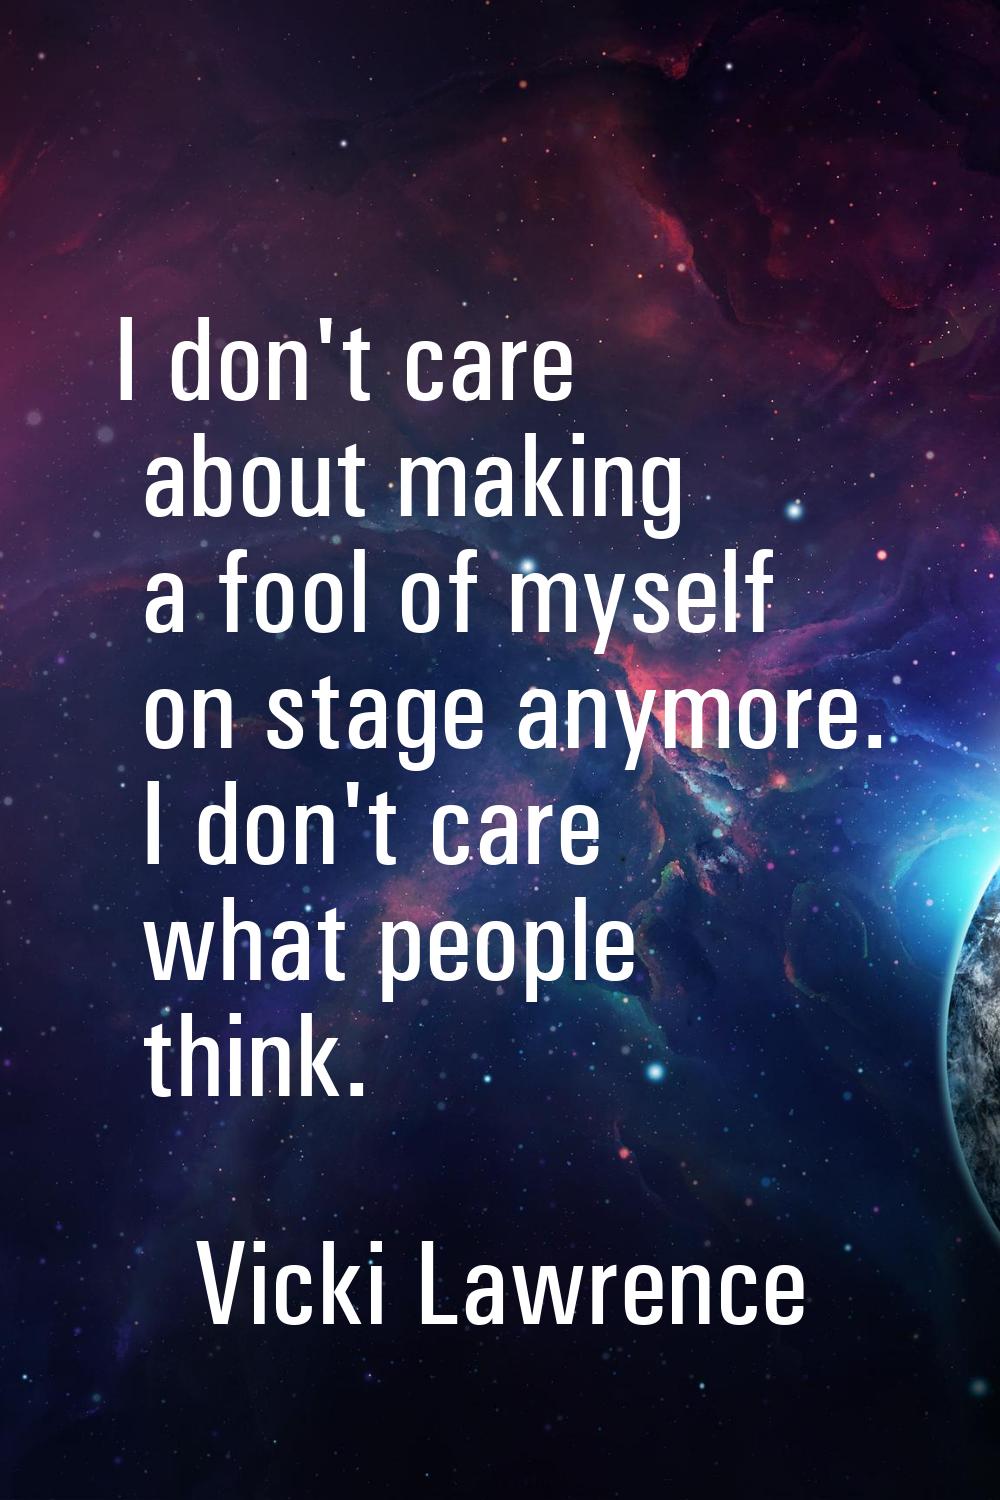 I don't care about making a fool of myself on stage anymore. I don't care what people think.